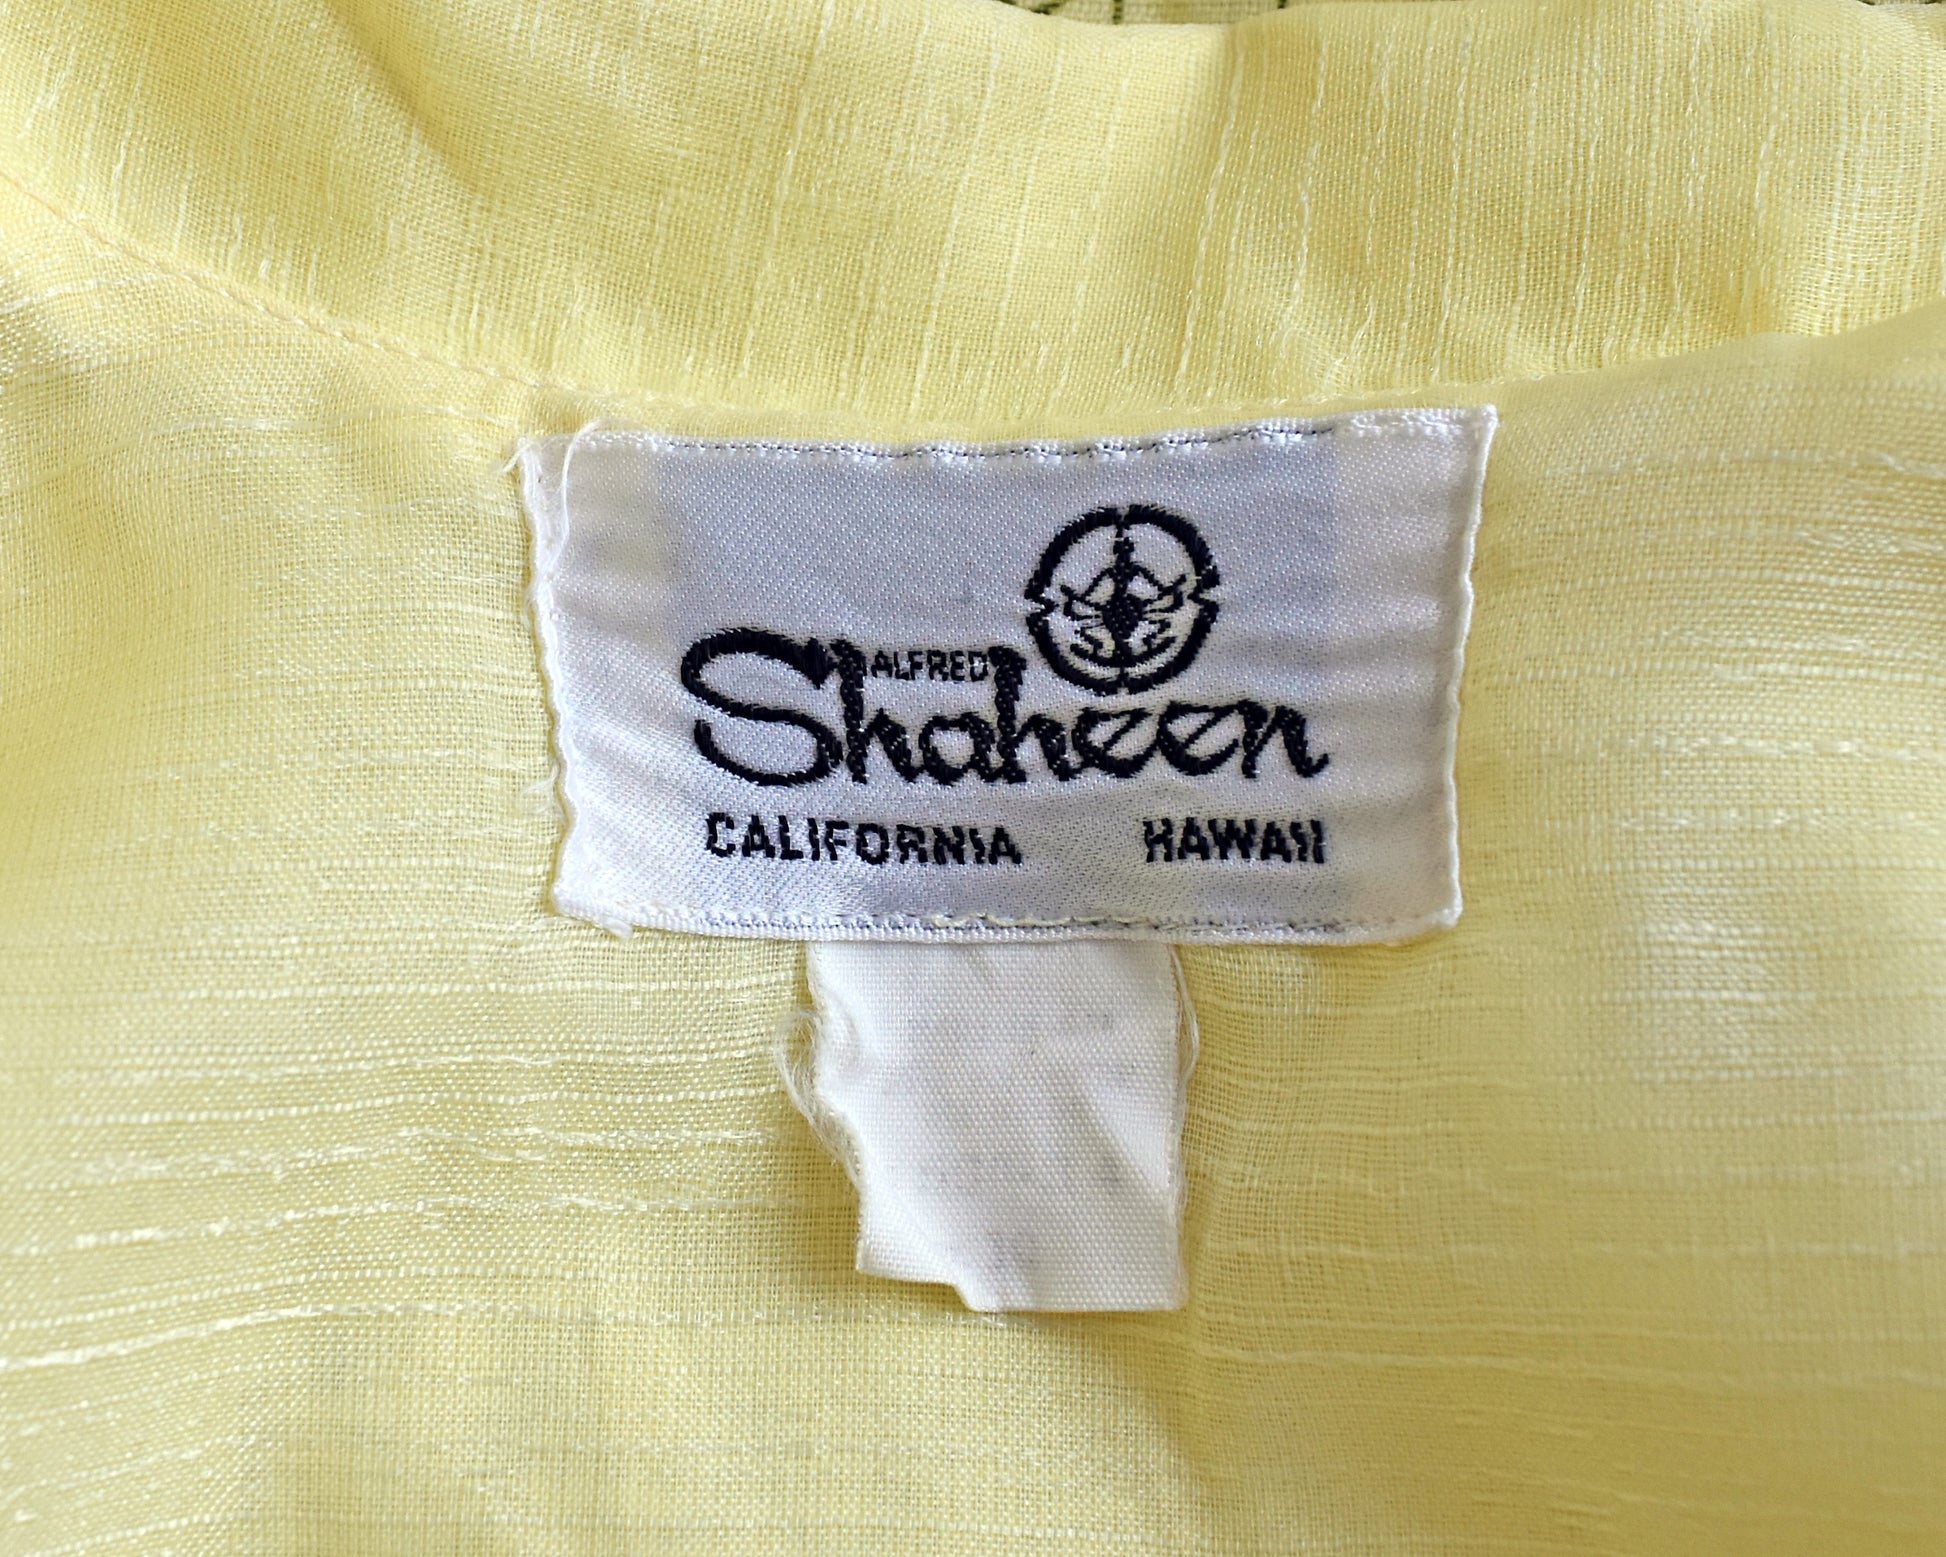 Close up of tag which says Alfred Shaheen, California Hawaii